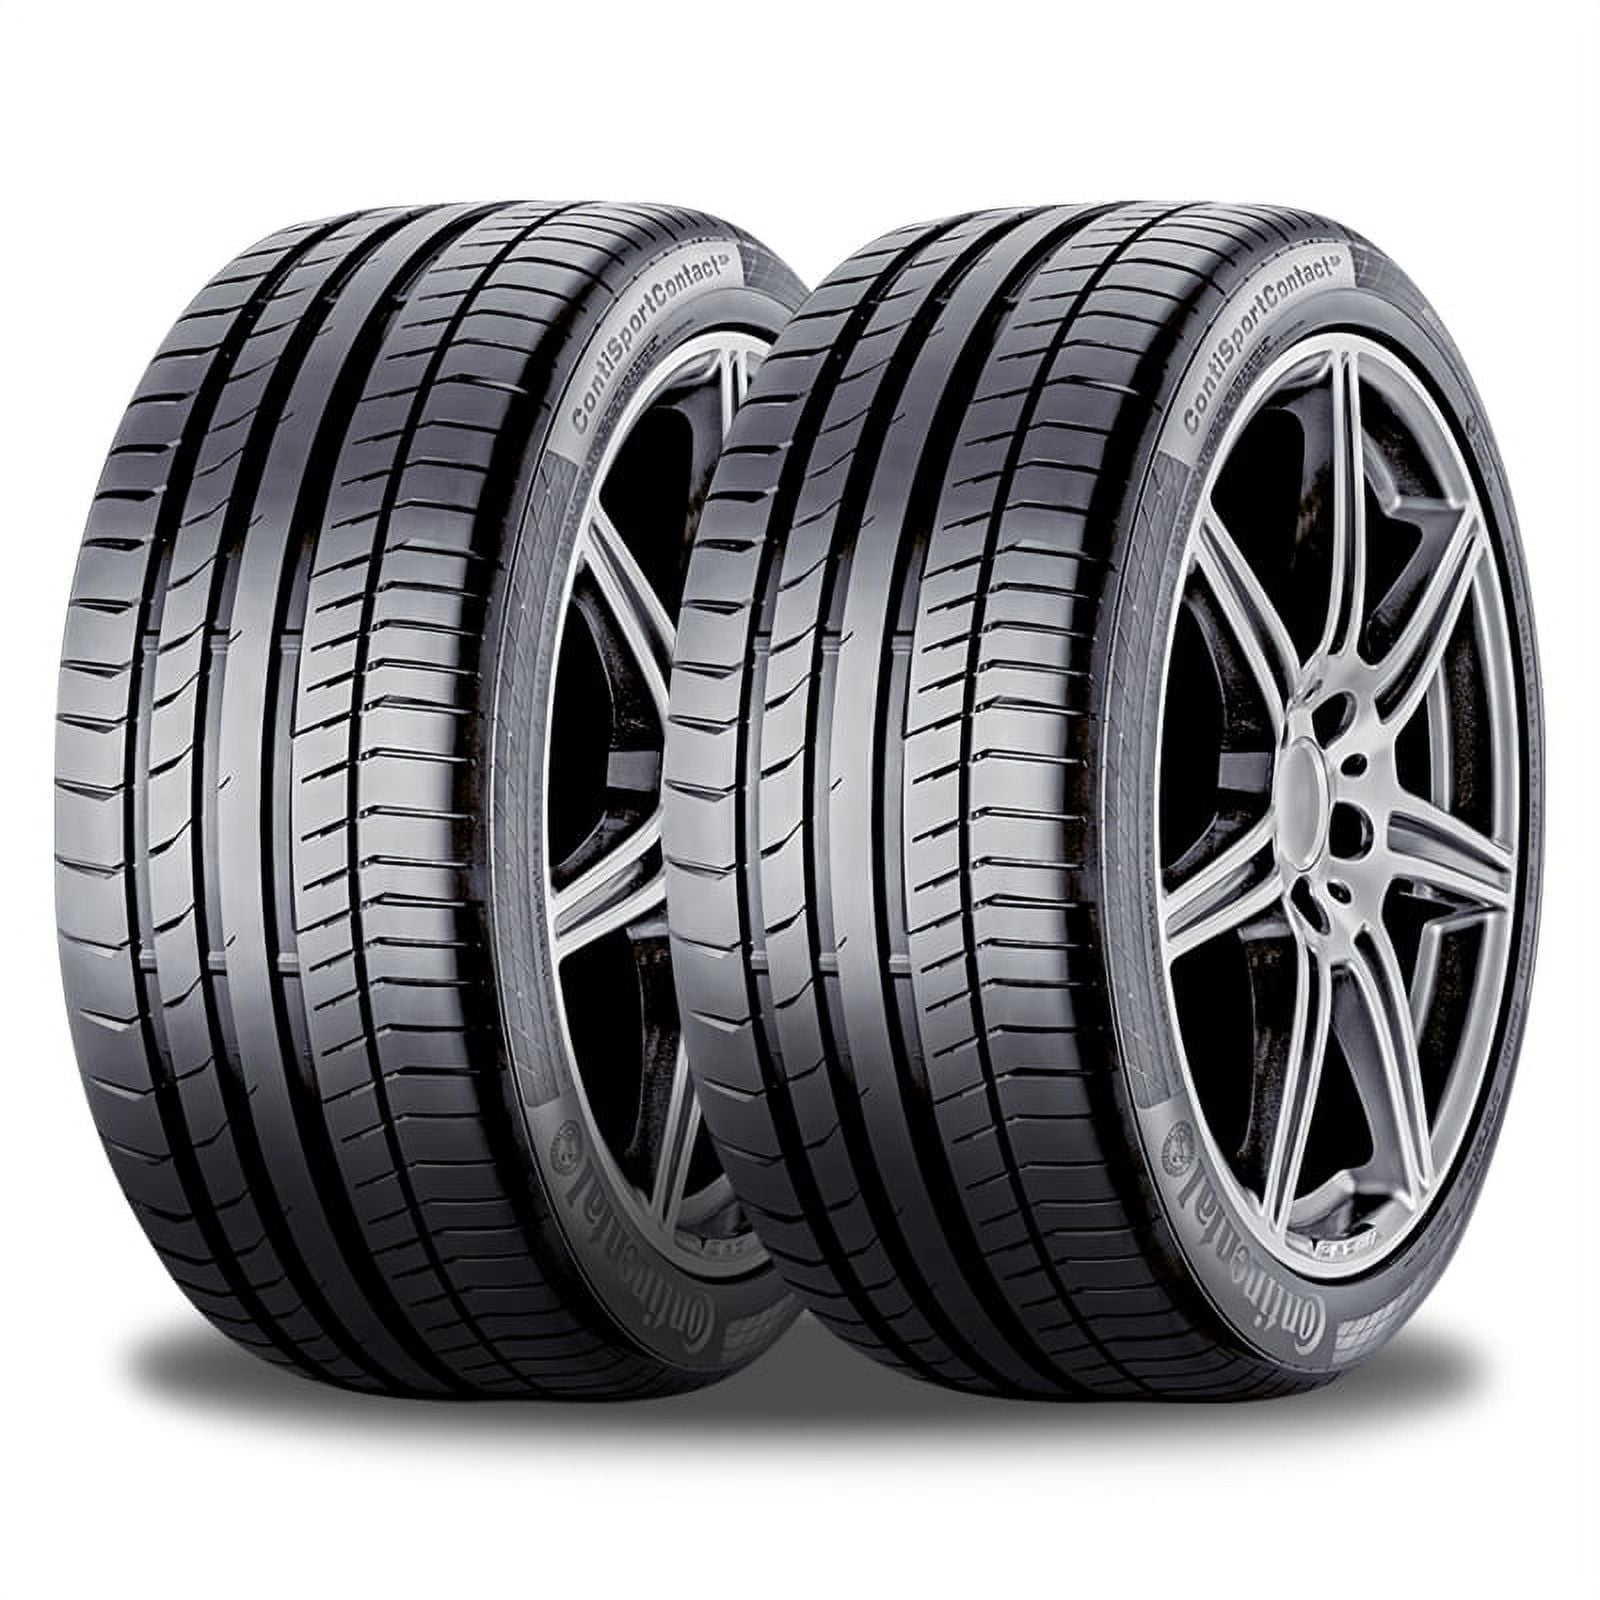 Continental ContiSportContact 5P Summer 265/40R21 101Y Passenger Tire